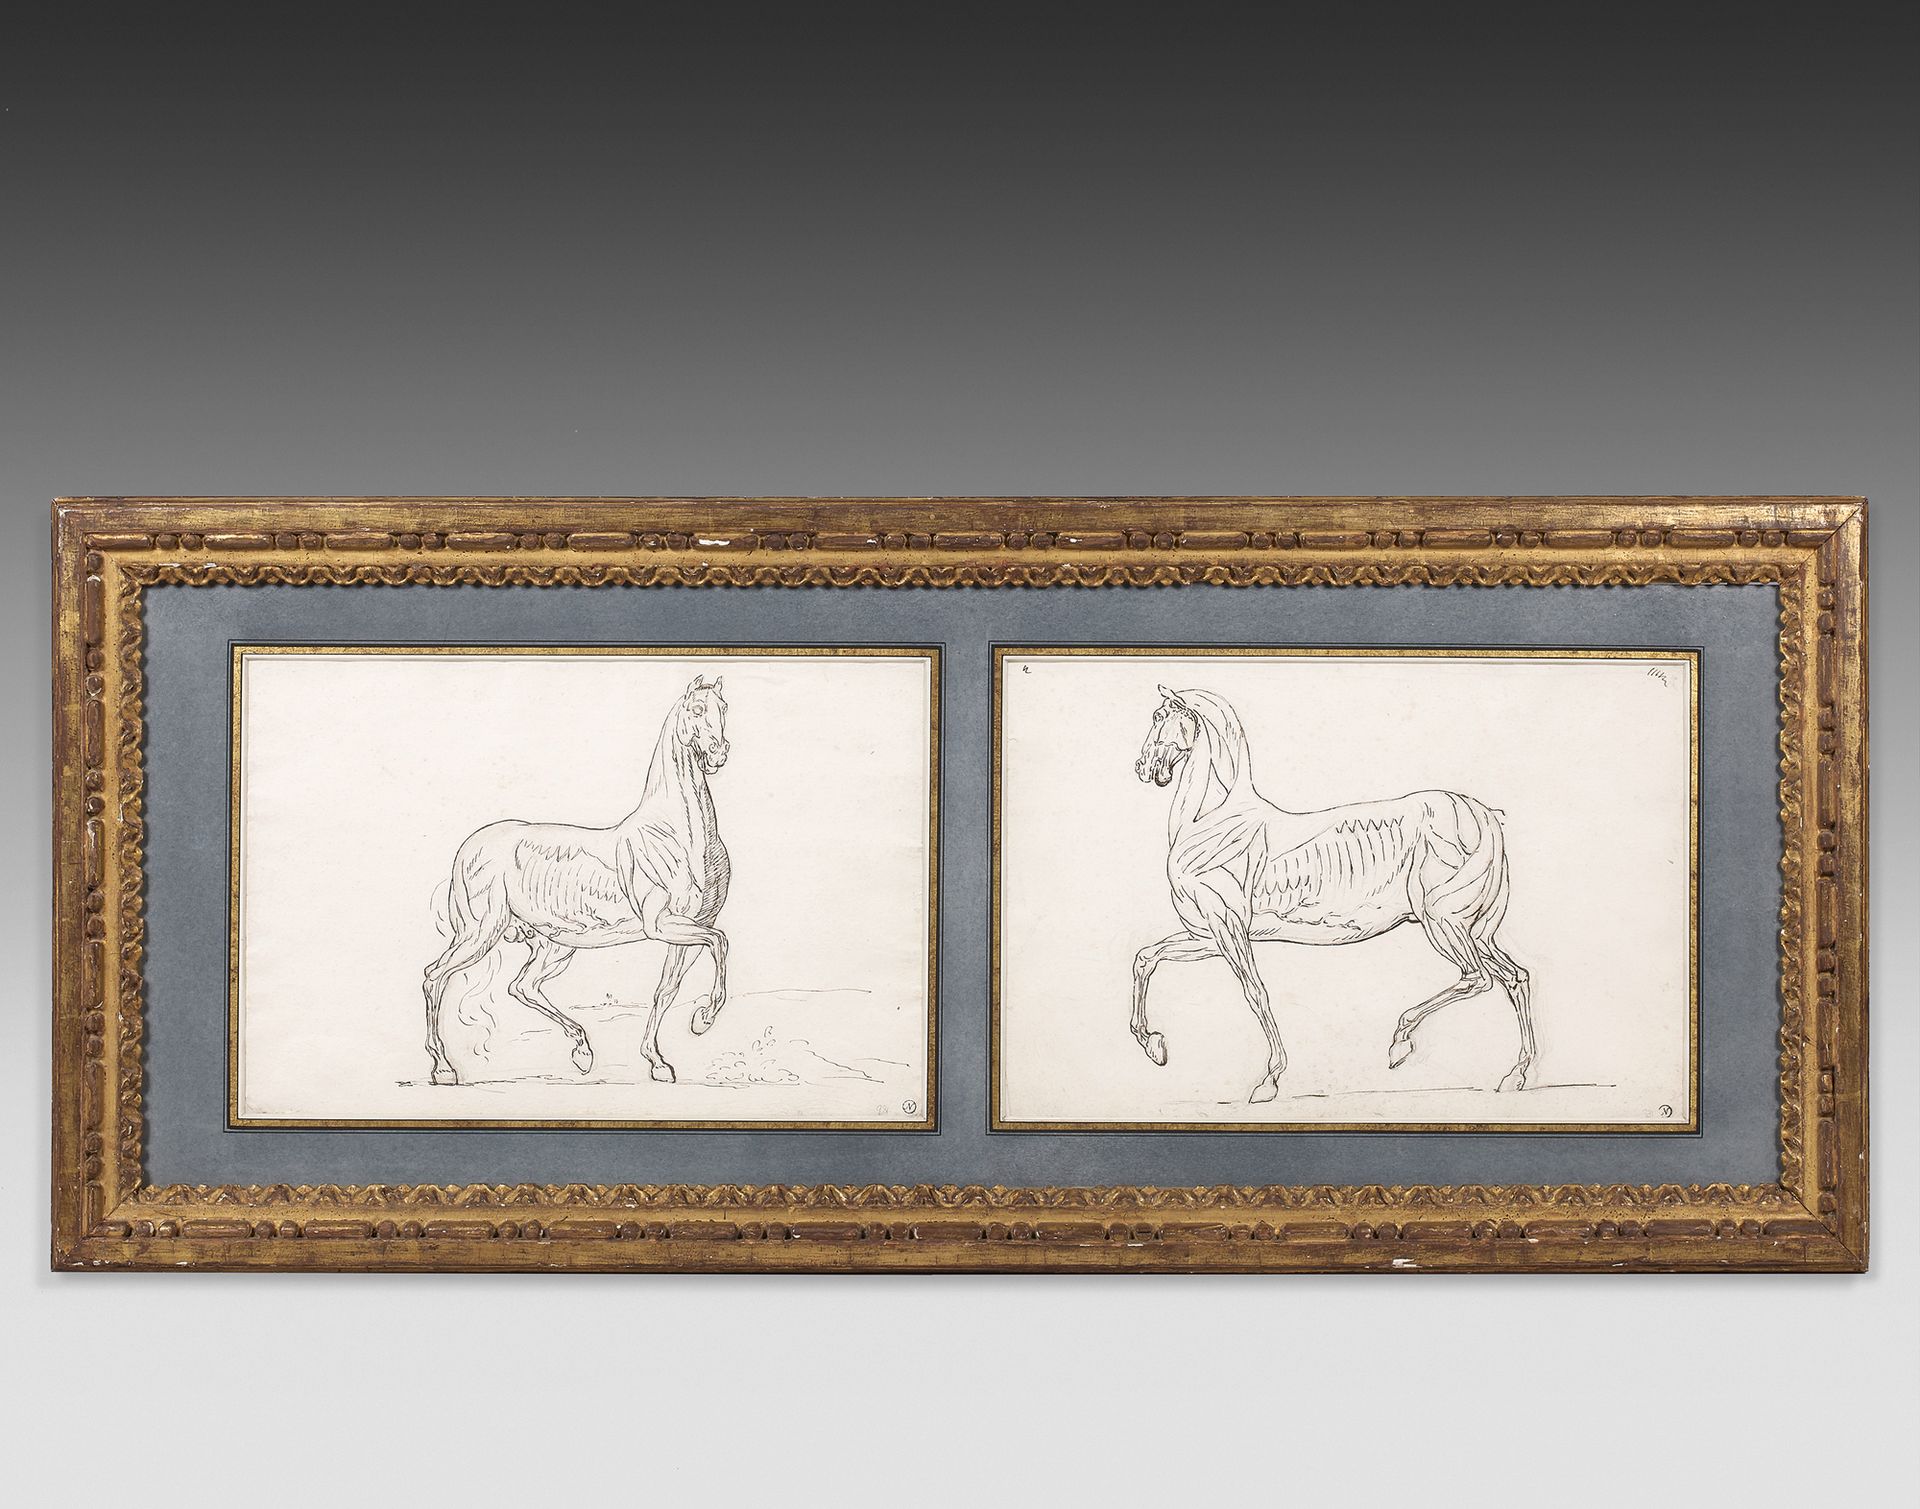 Jean Claude NAIGEON (Dijon 1753-1832) Two horses
Two drawings on the same mount,&hellip;